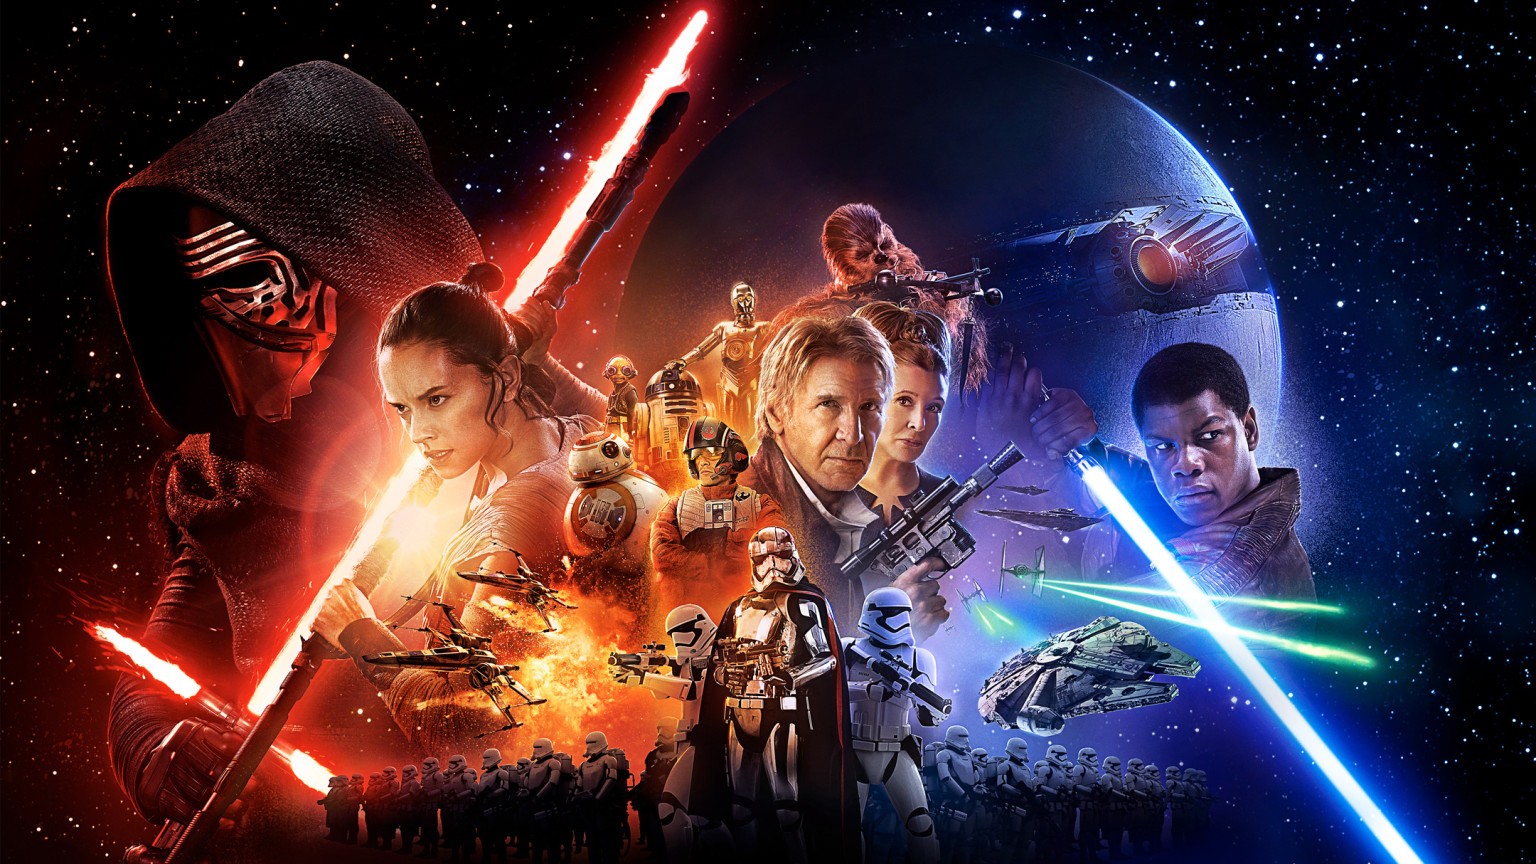 General 1536x864 Star Wars: The Force Awakens Star Wars Kylo Ren Han Solo Captain Phasma stormtrooper Chewbacca C-3PO R2-D2 Poe Dameron BB-8 lightsaber movie poster Rey (Star Wars) Star Wars Heroes Star Wars Villains science fiction Millennium Falcon movies movie characters